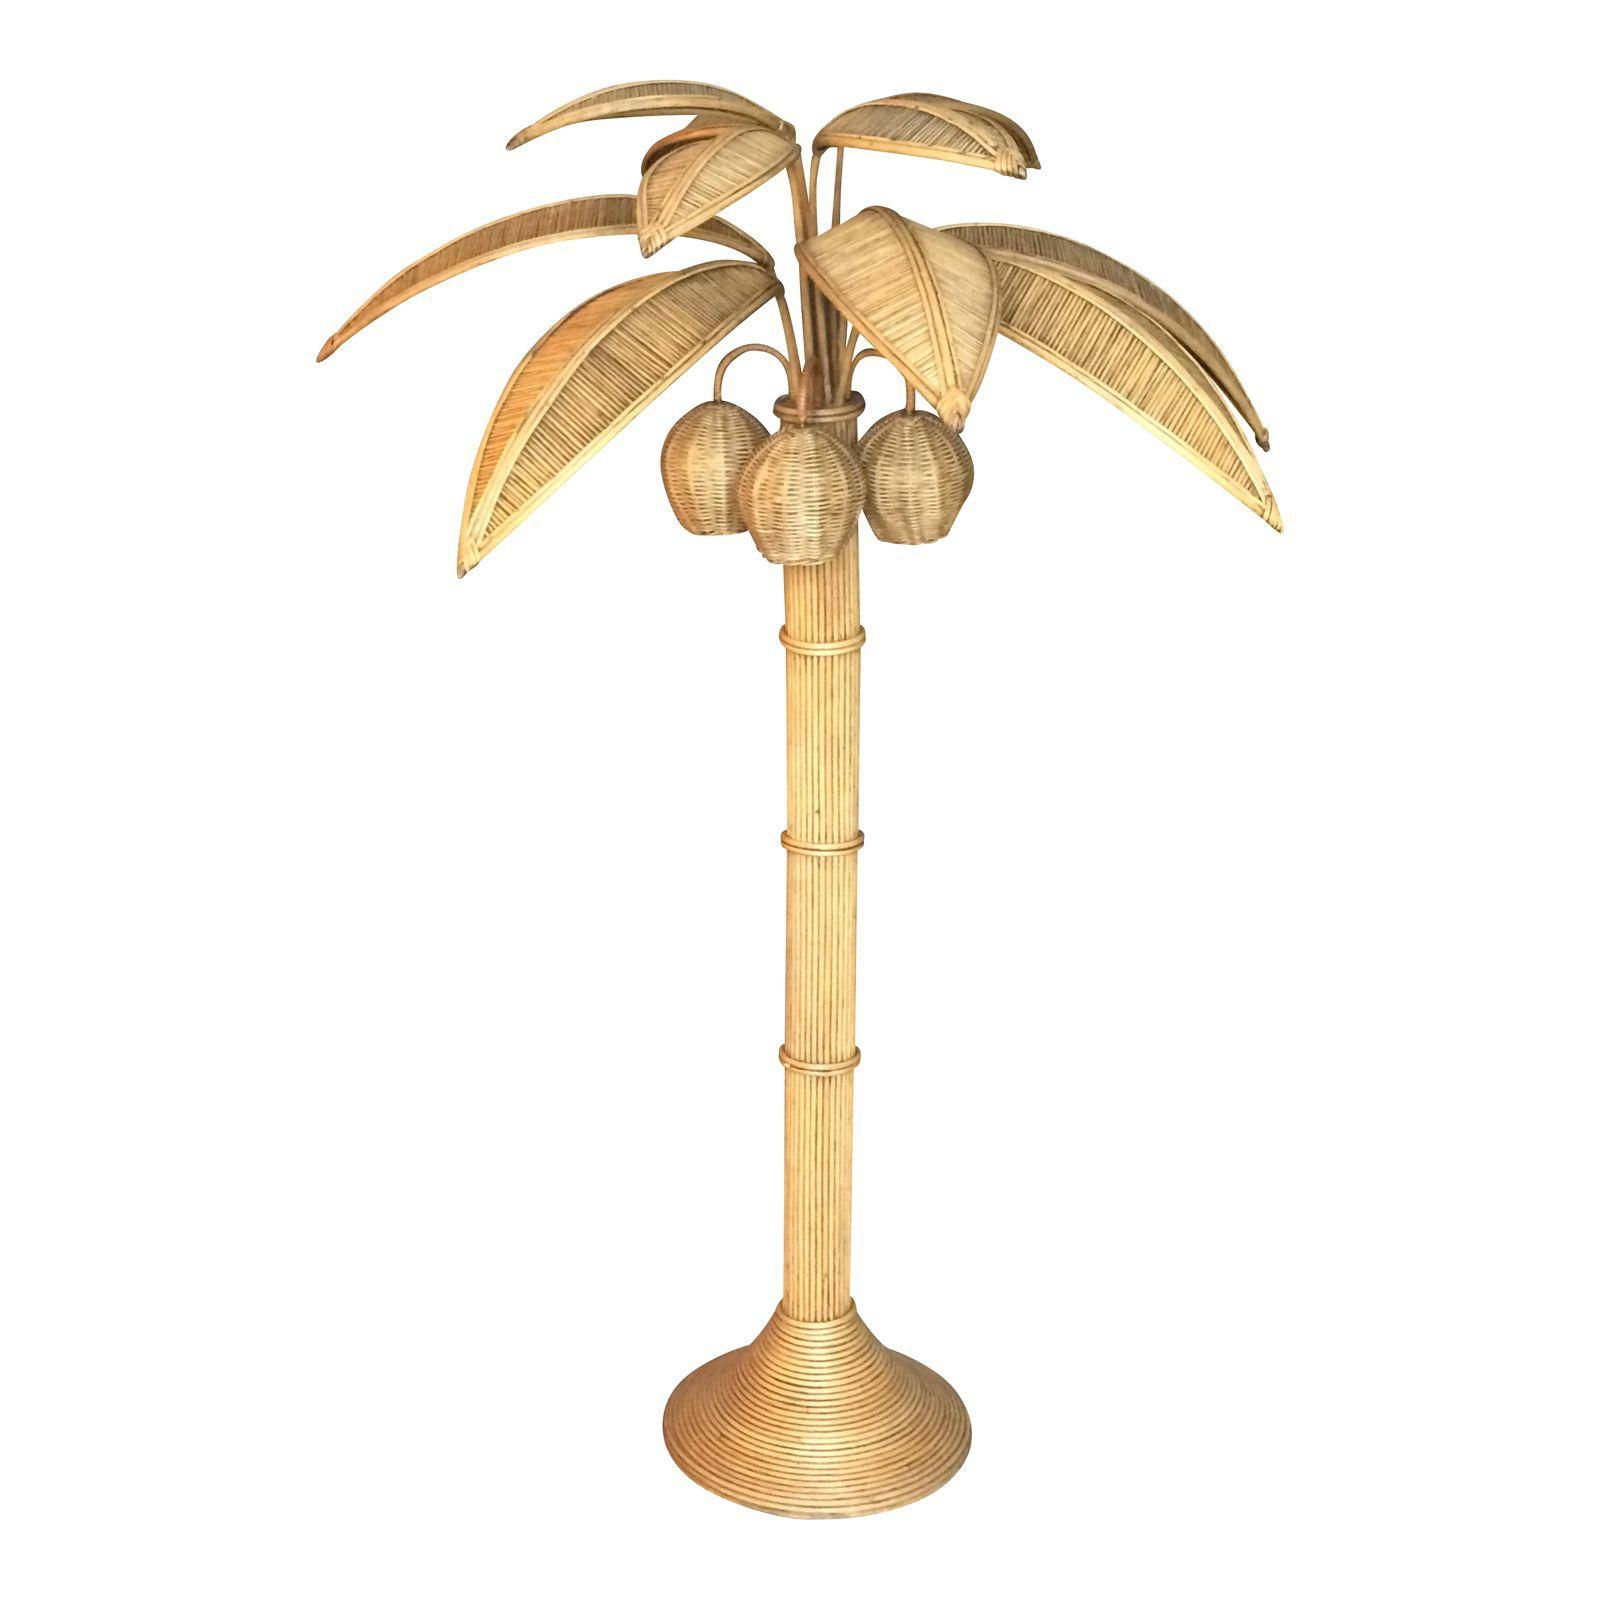 Mario Lopez Torres Rattan Palm Tree Floor Lamp Tree Floor intended for sizing 1600 X 1600